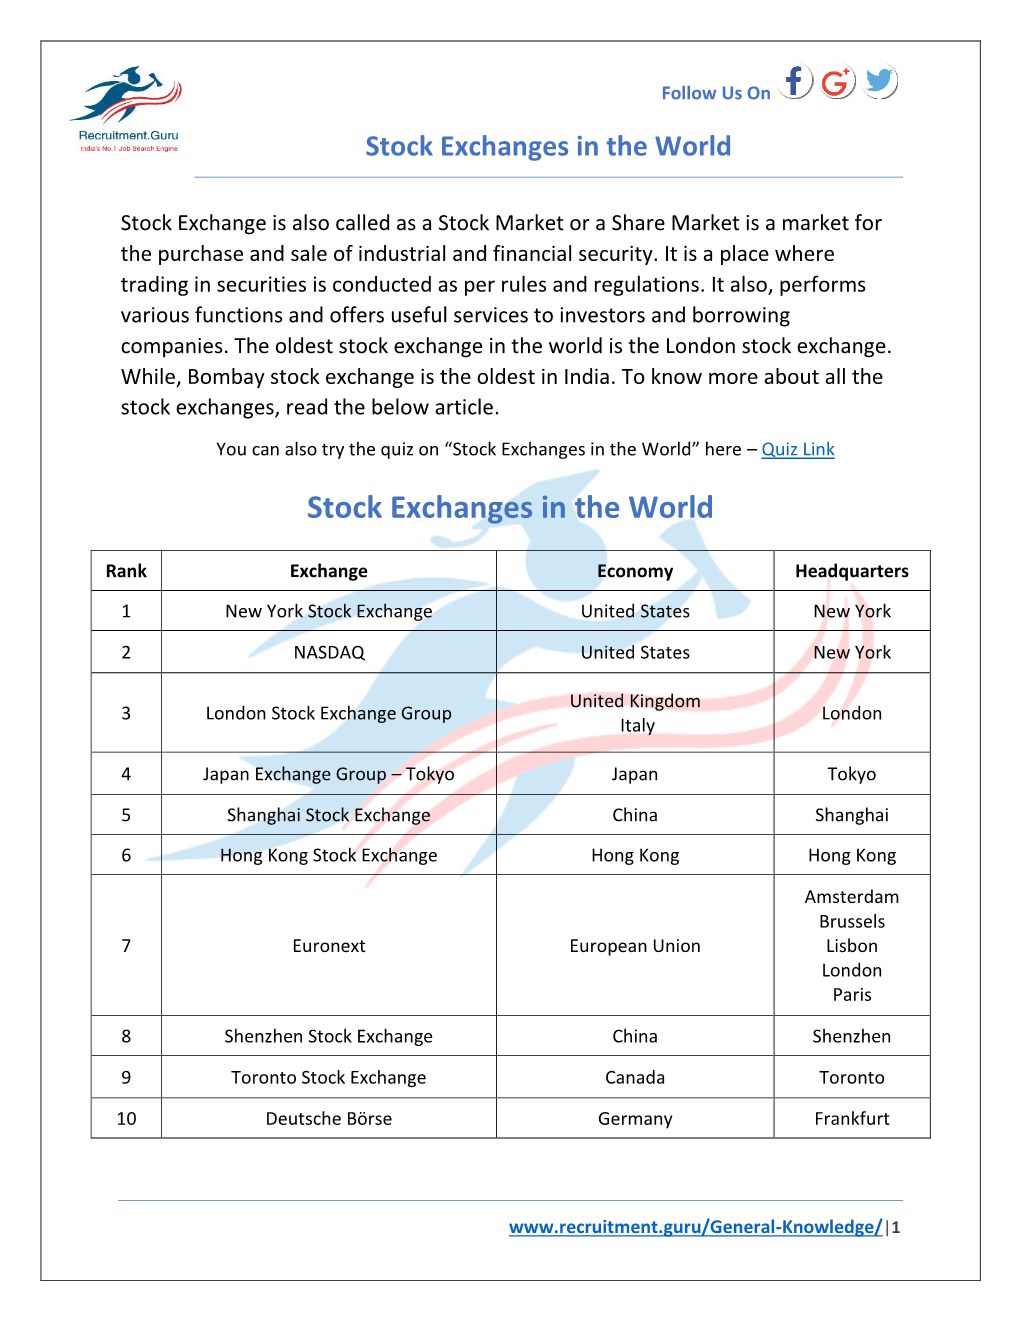 Stock Exchanges in the World